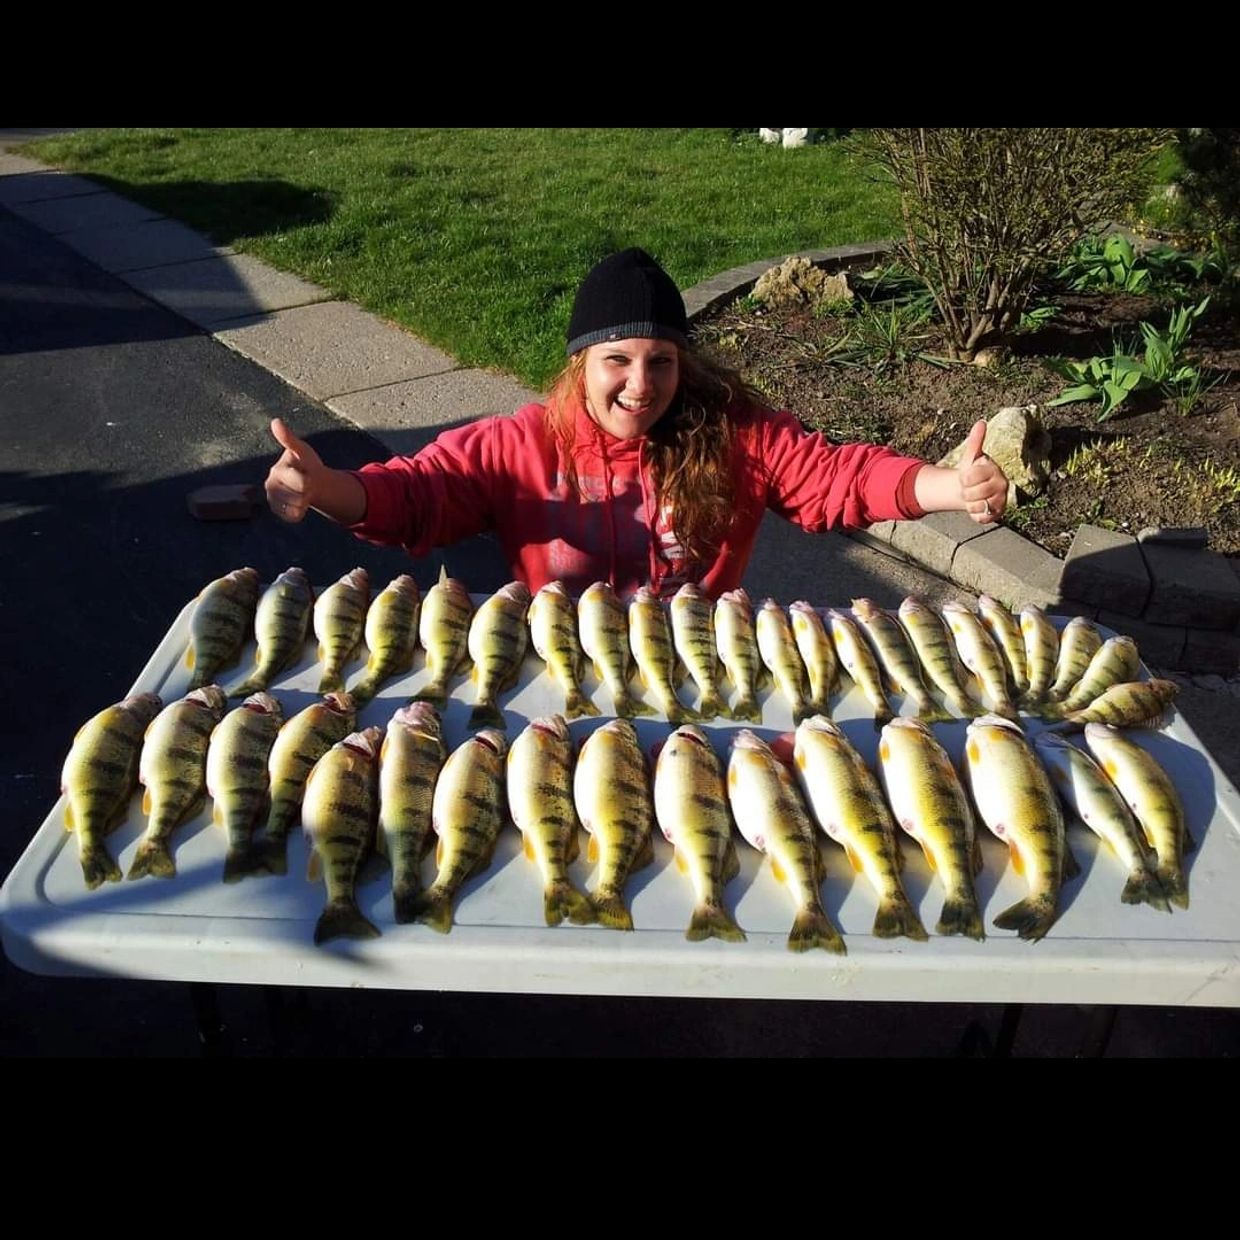 Experience Exciting Walleye Fishing on the Niagara River